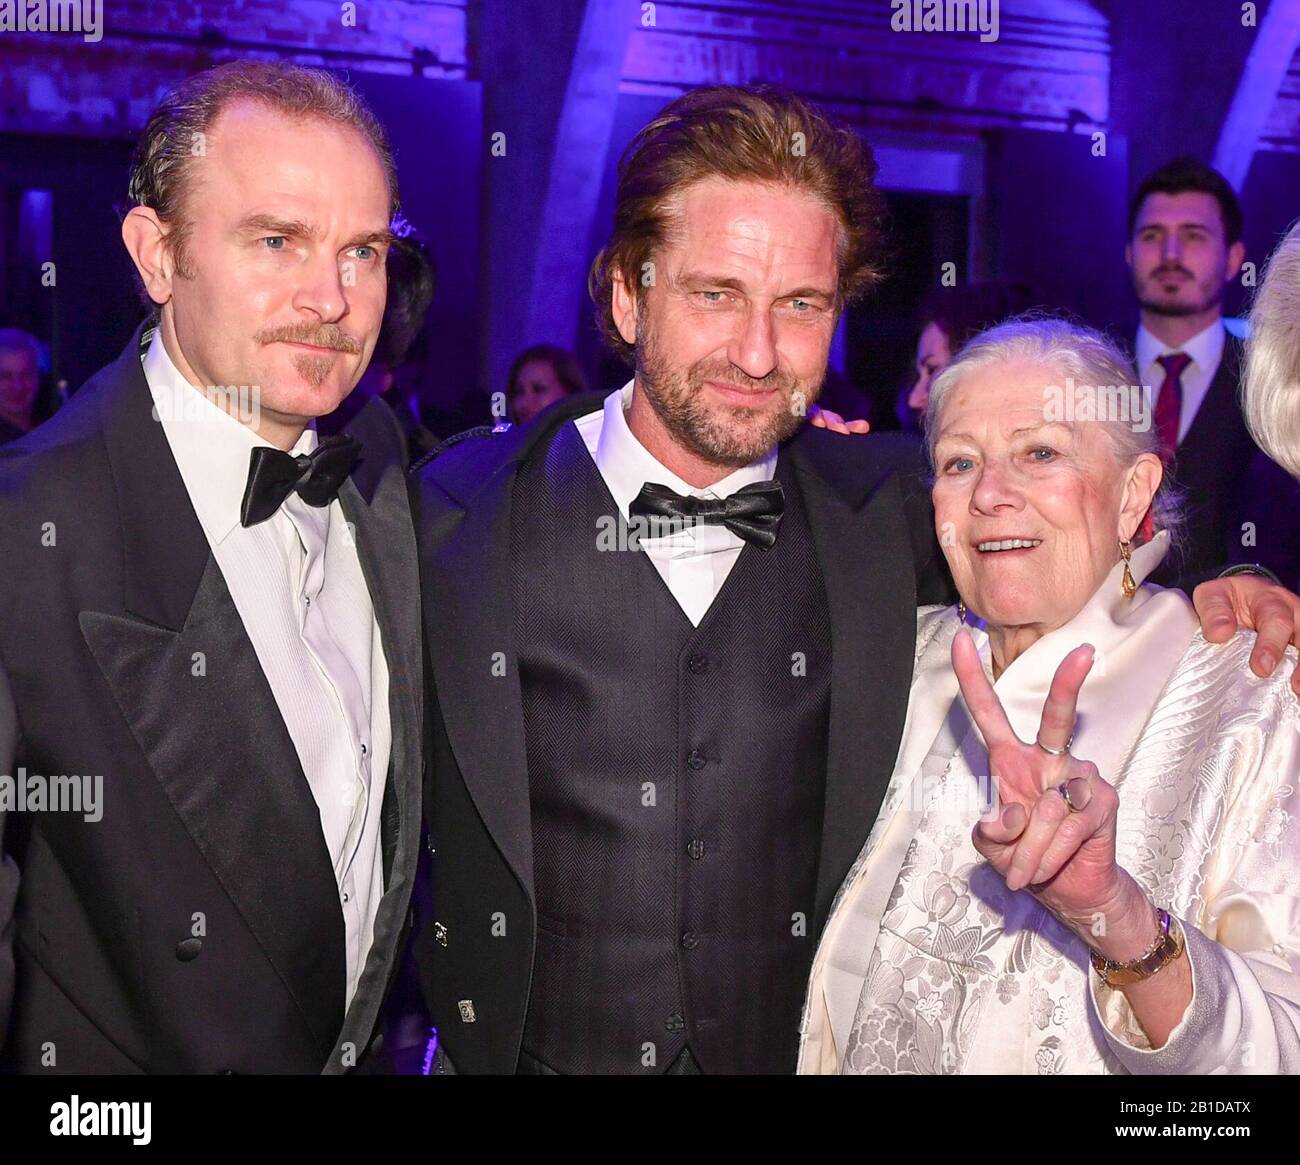 Berlin, Germany. 23rd Feb, 2020. 70th Berlinale, Cinema for Peace Gala: Carlo Gabriel Nero (l-r), the son of Vanessa Redgrave and Franco Nero, actor Gerard Butler and director Vanessa Redgrave The International Film Festival takes place from 20.02. to 01.03.2020. Credit: Jens Kalaene/dpa-Zentralbild/dpa/Alamy Live News Stock Photo